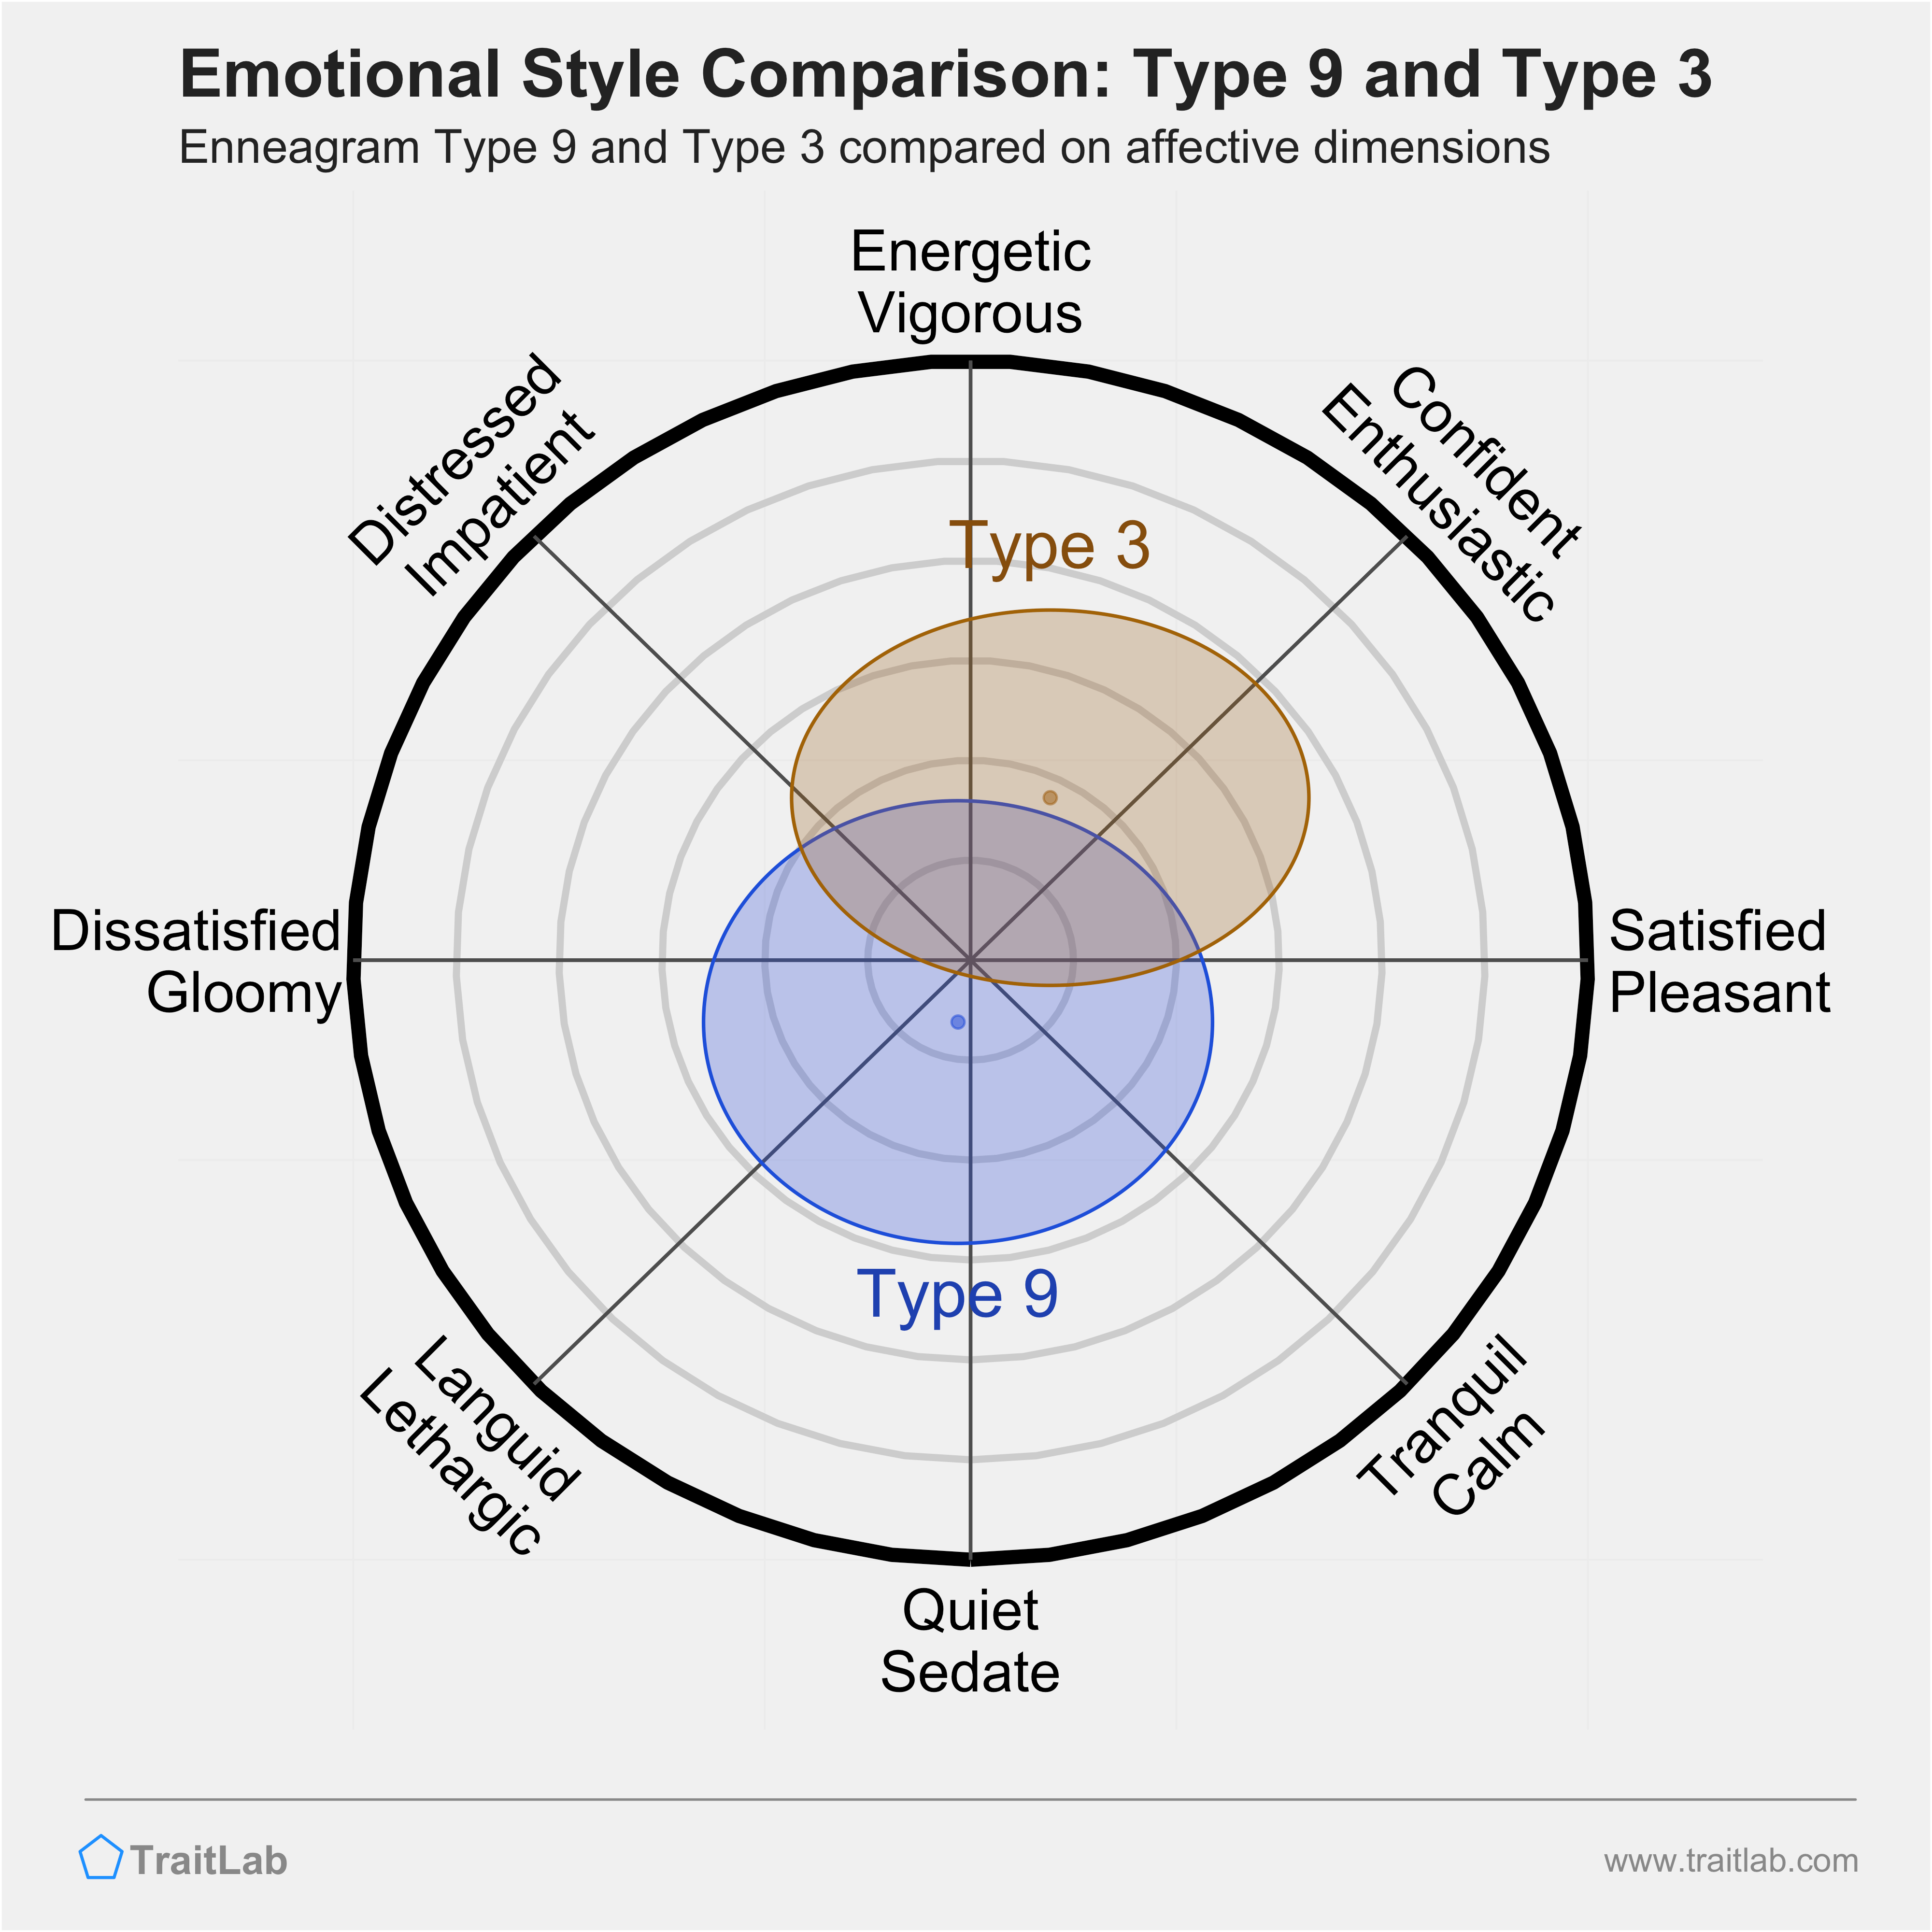 Type 9 and Type 3 comparison across emotional (affective) dimensions